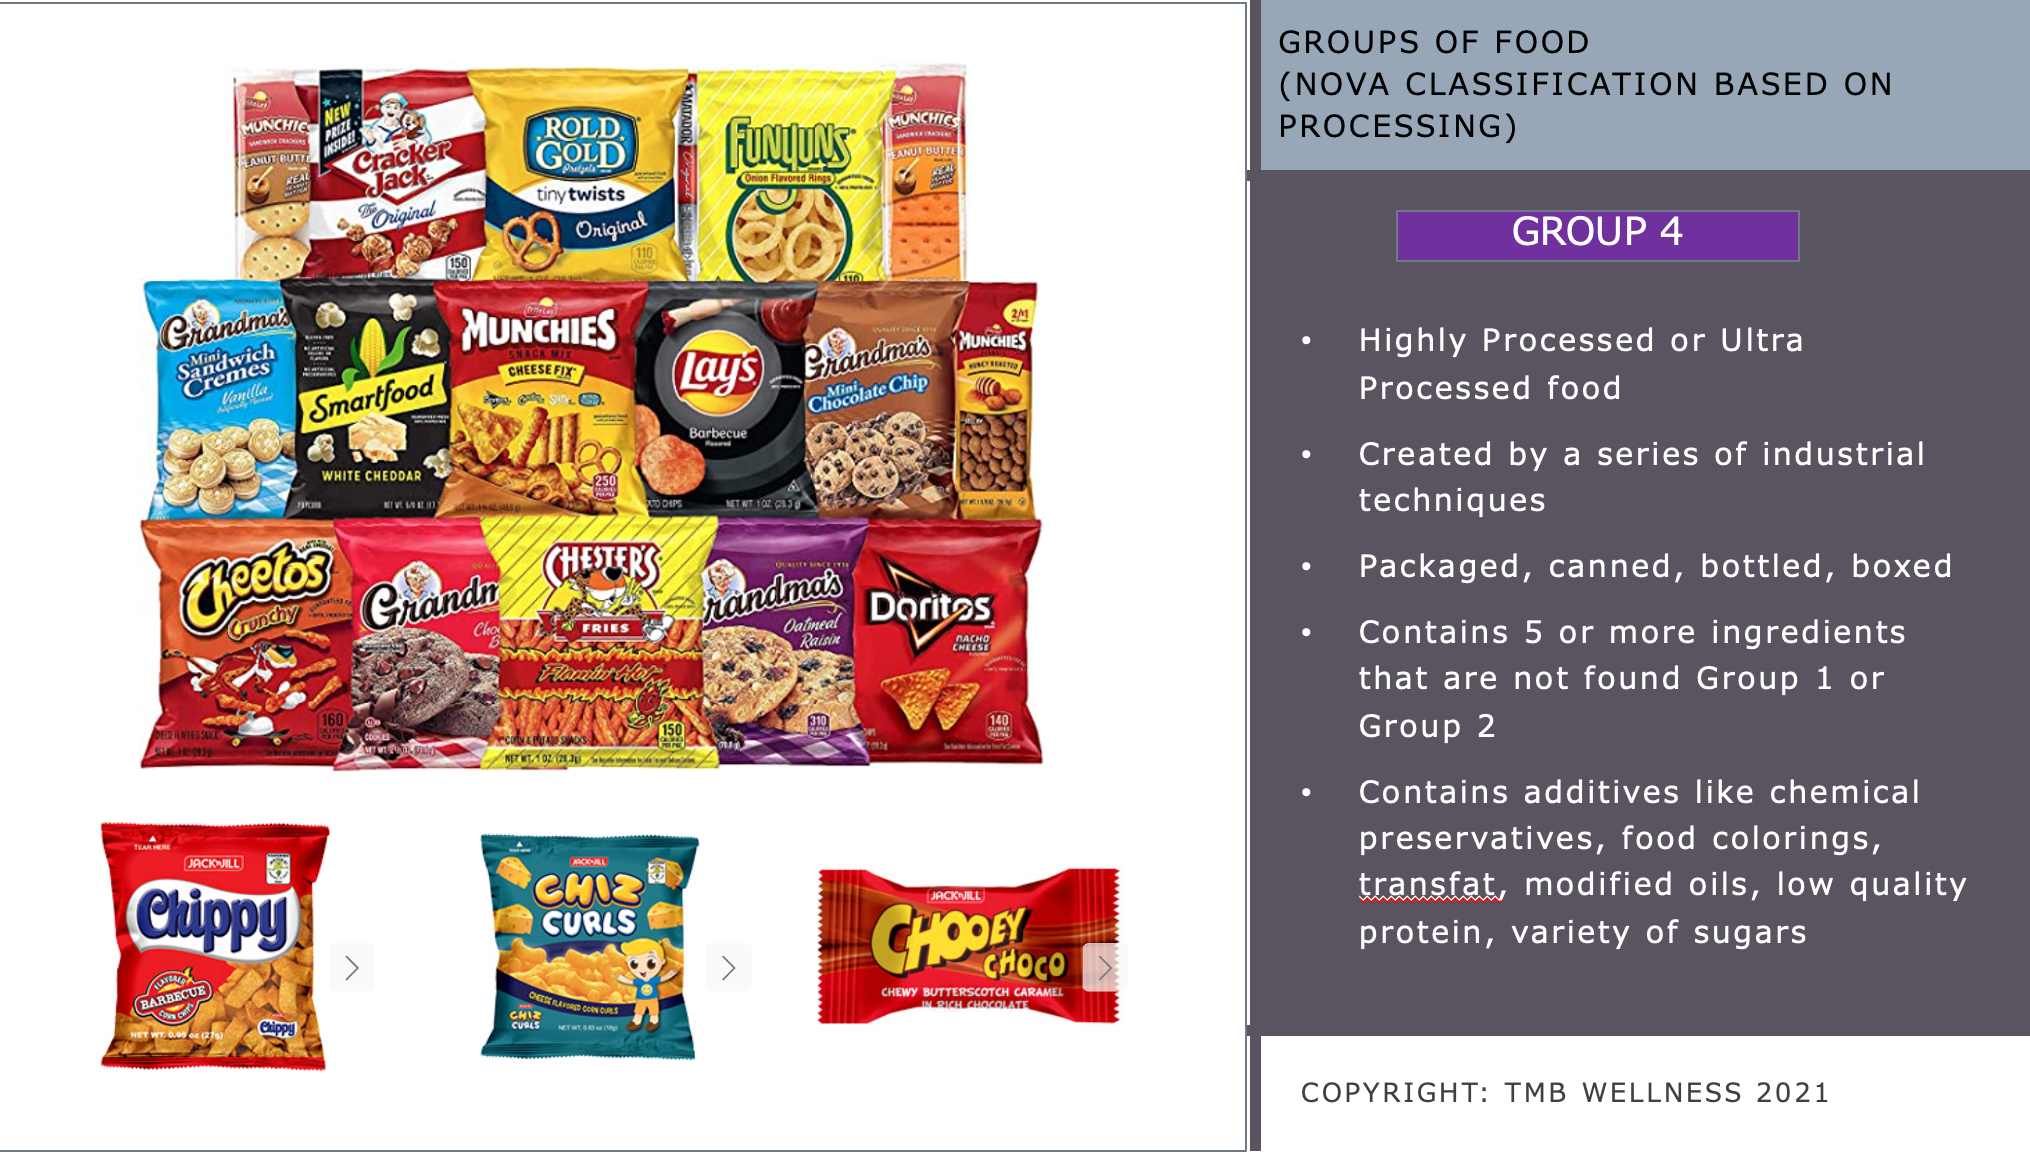 Highly processed or ultraprocessed food